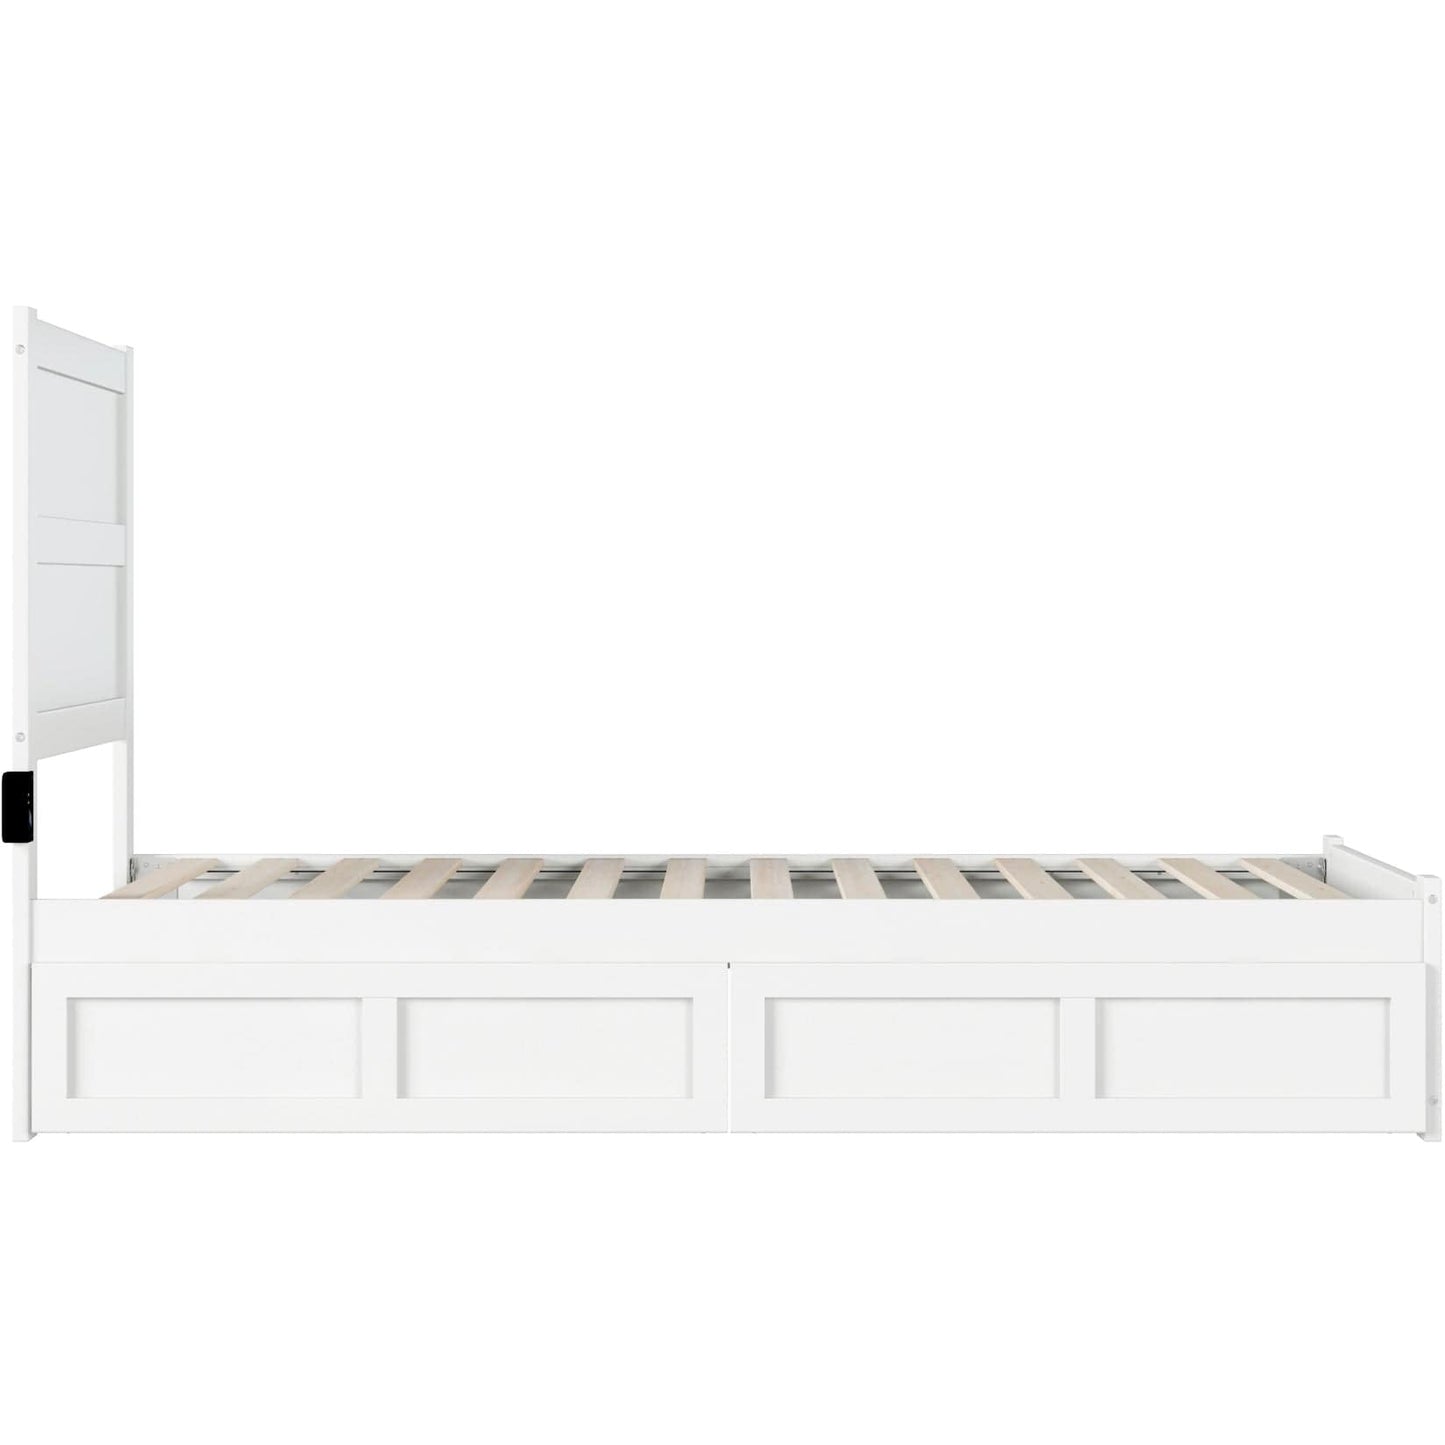 AFI Furnishings NoHo Twin Extra Long Bed with Footboard and 2 Drawers in White AG9163412